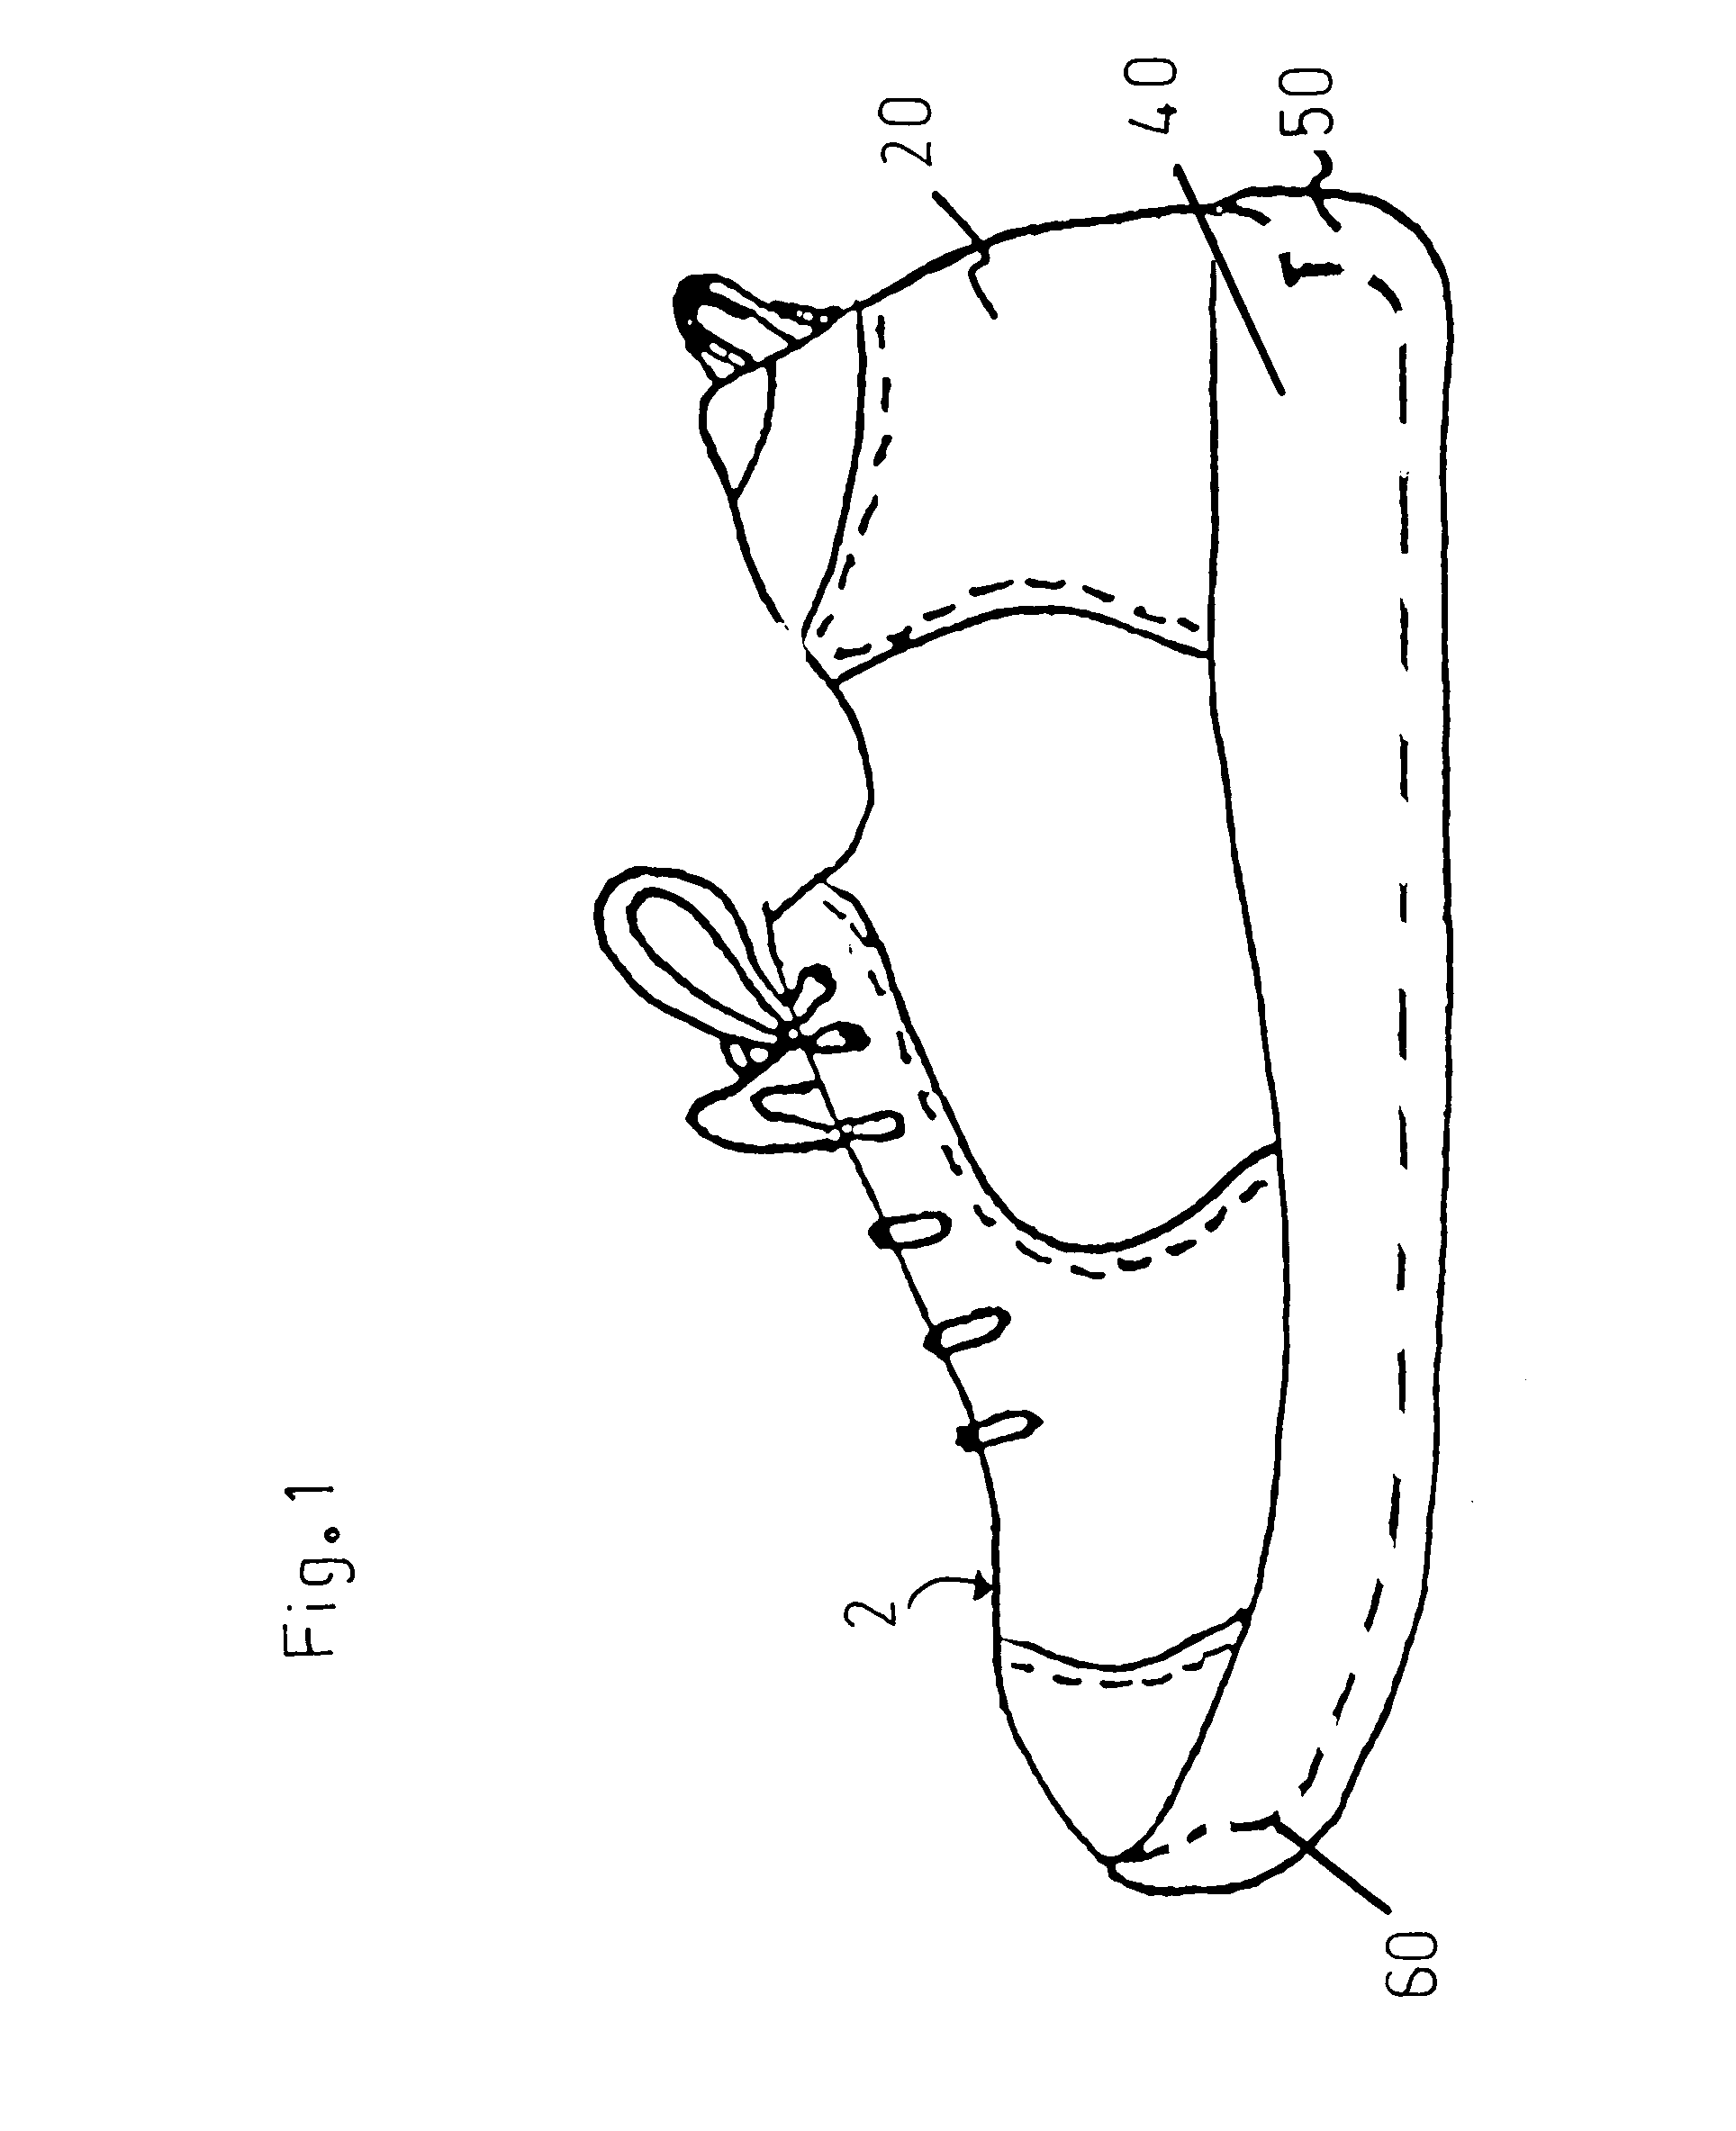 Foot cushioning construct and system for use in an article of footwear